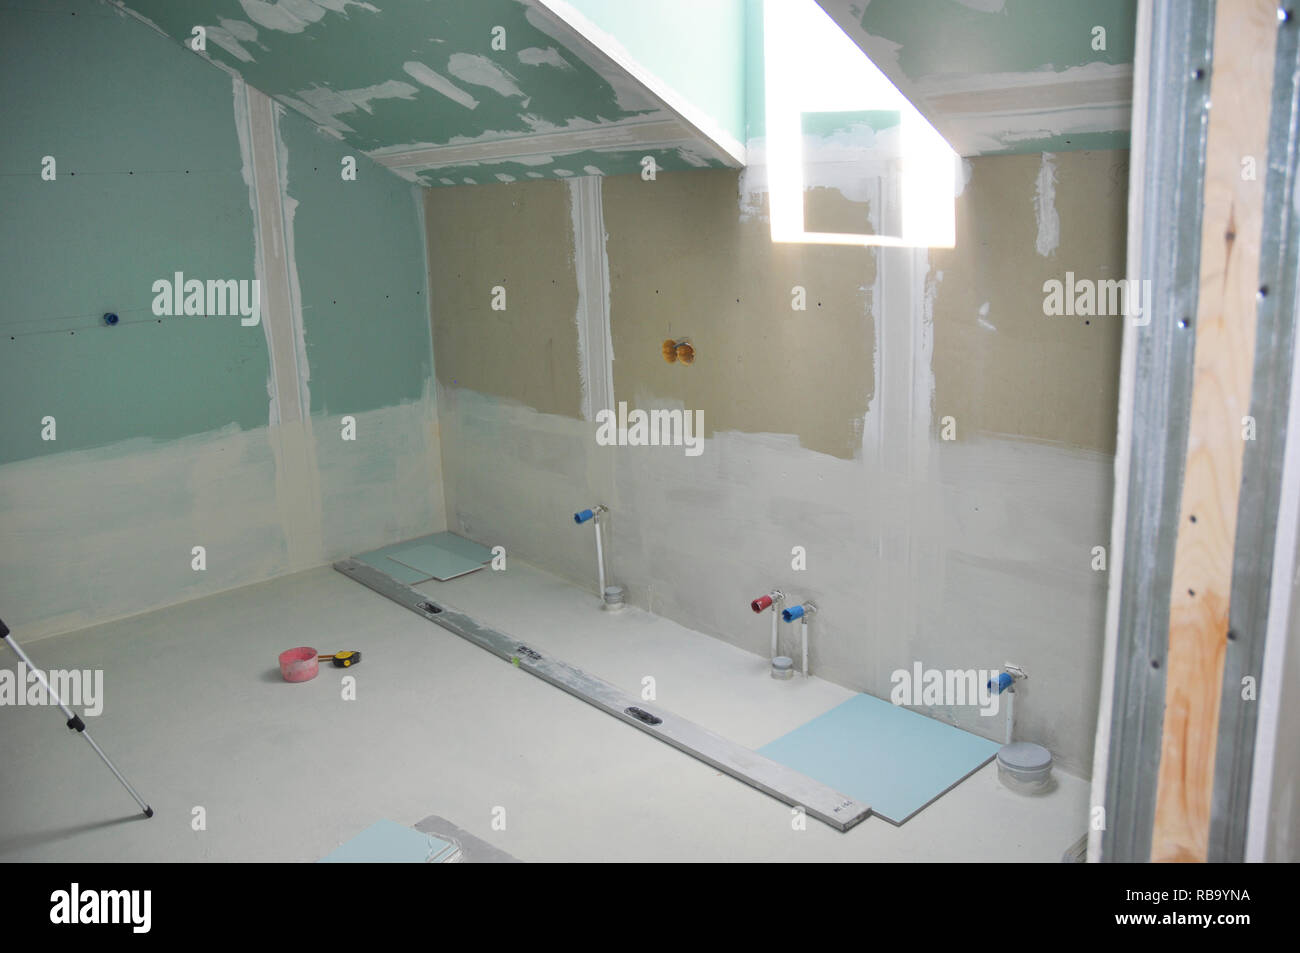 Attic bathroom with skylight under construction with drywall taping. Stock Photo